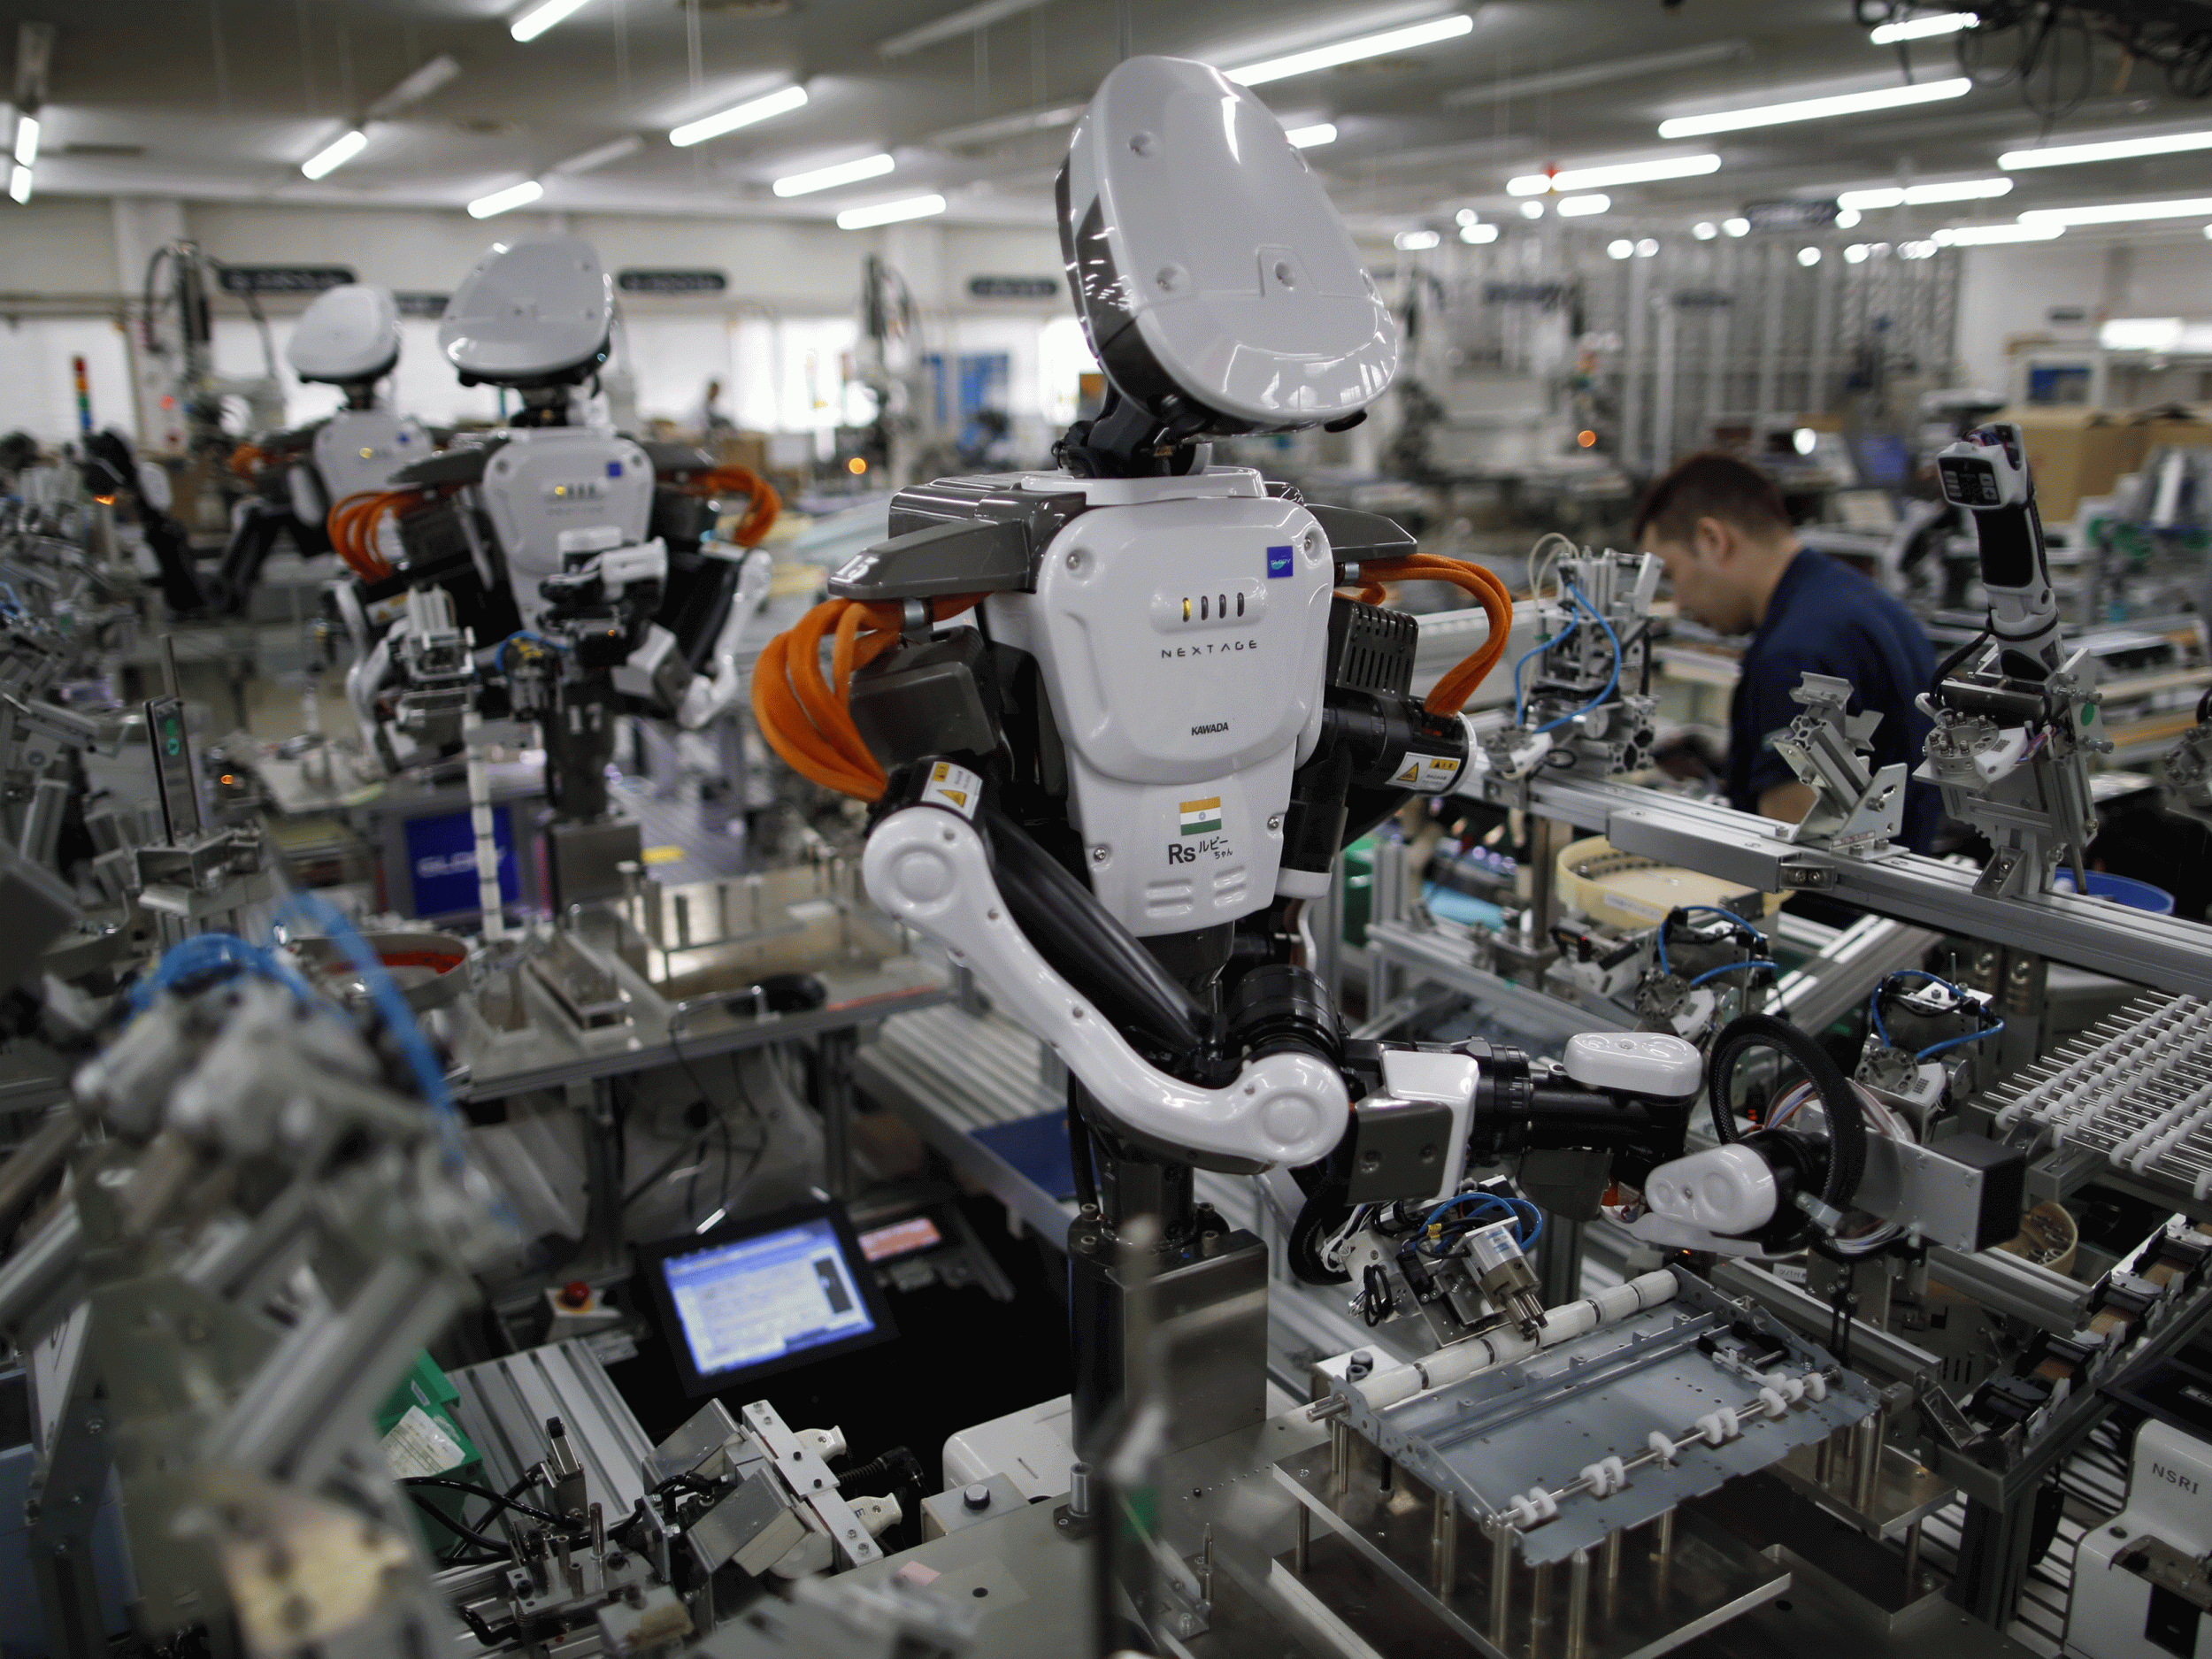 A third of London jobs to be taken by robots in 20 years, says report